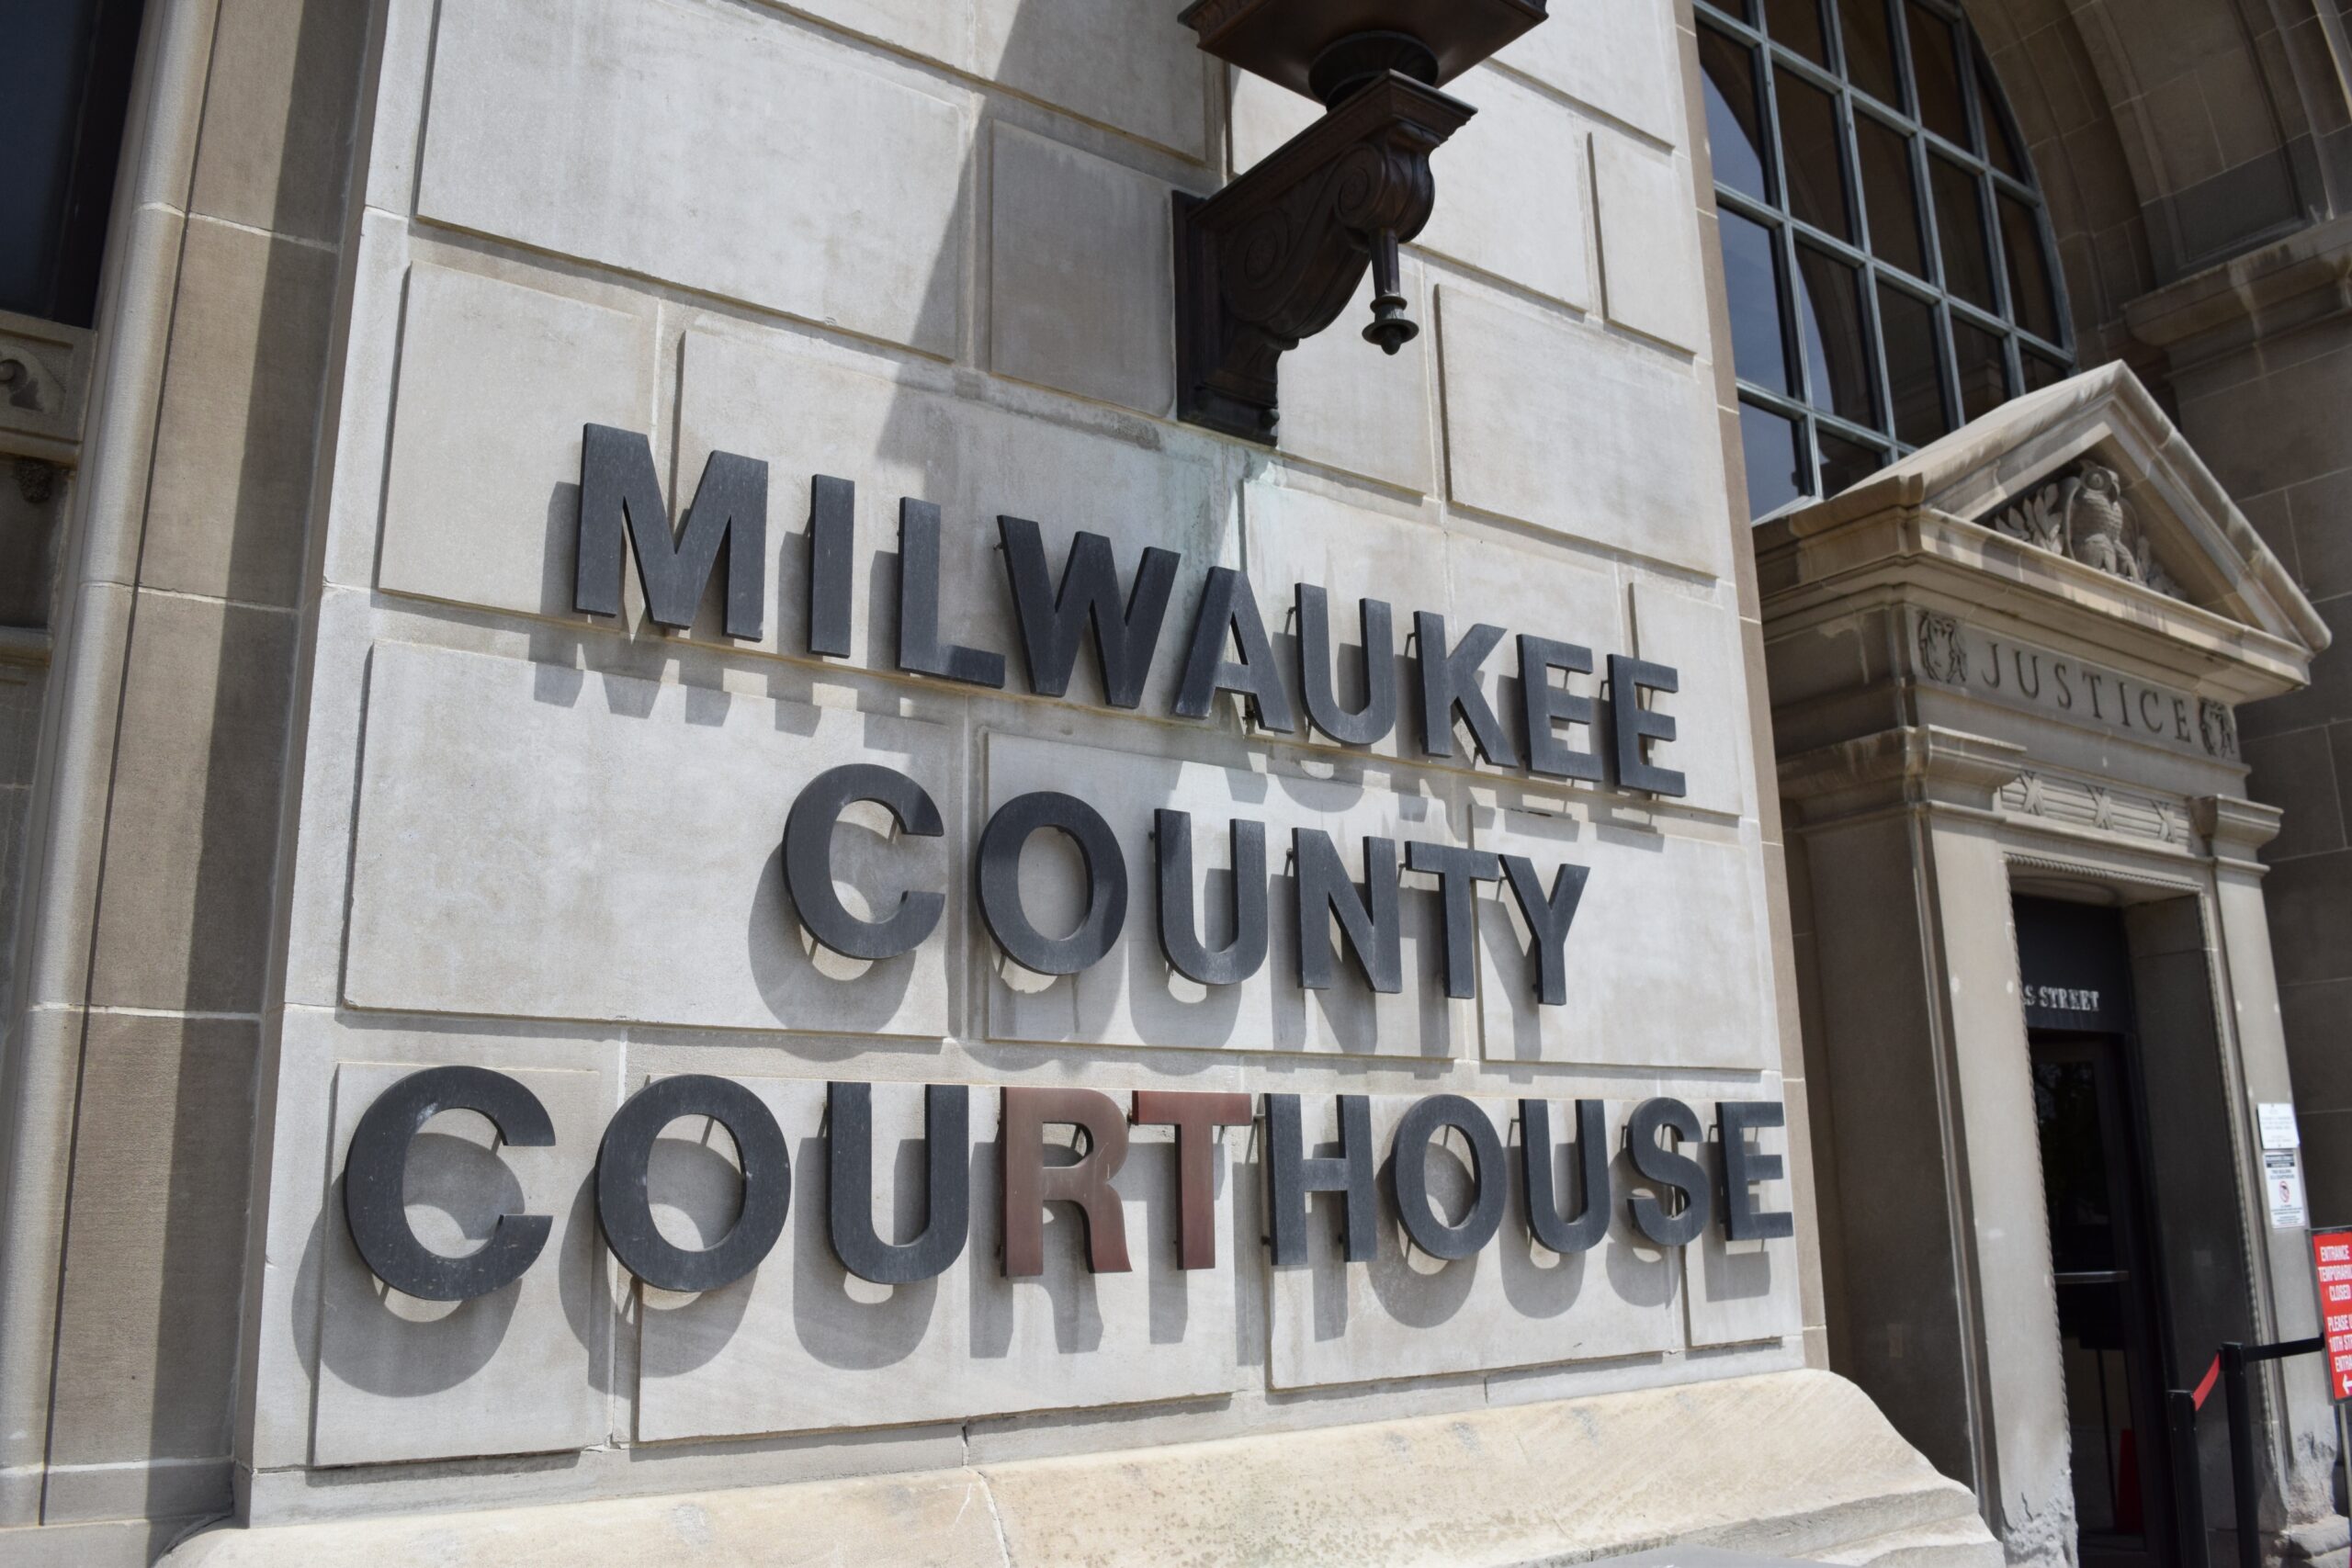 Trial for former Milwaukee election official charged with election fraud expected to conclude Wednesday